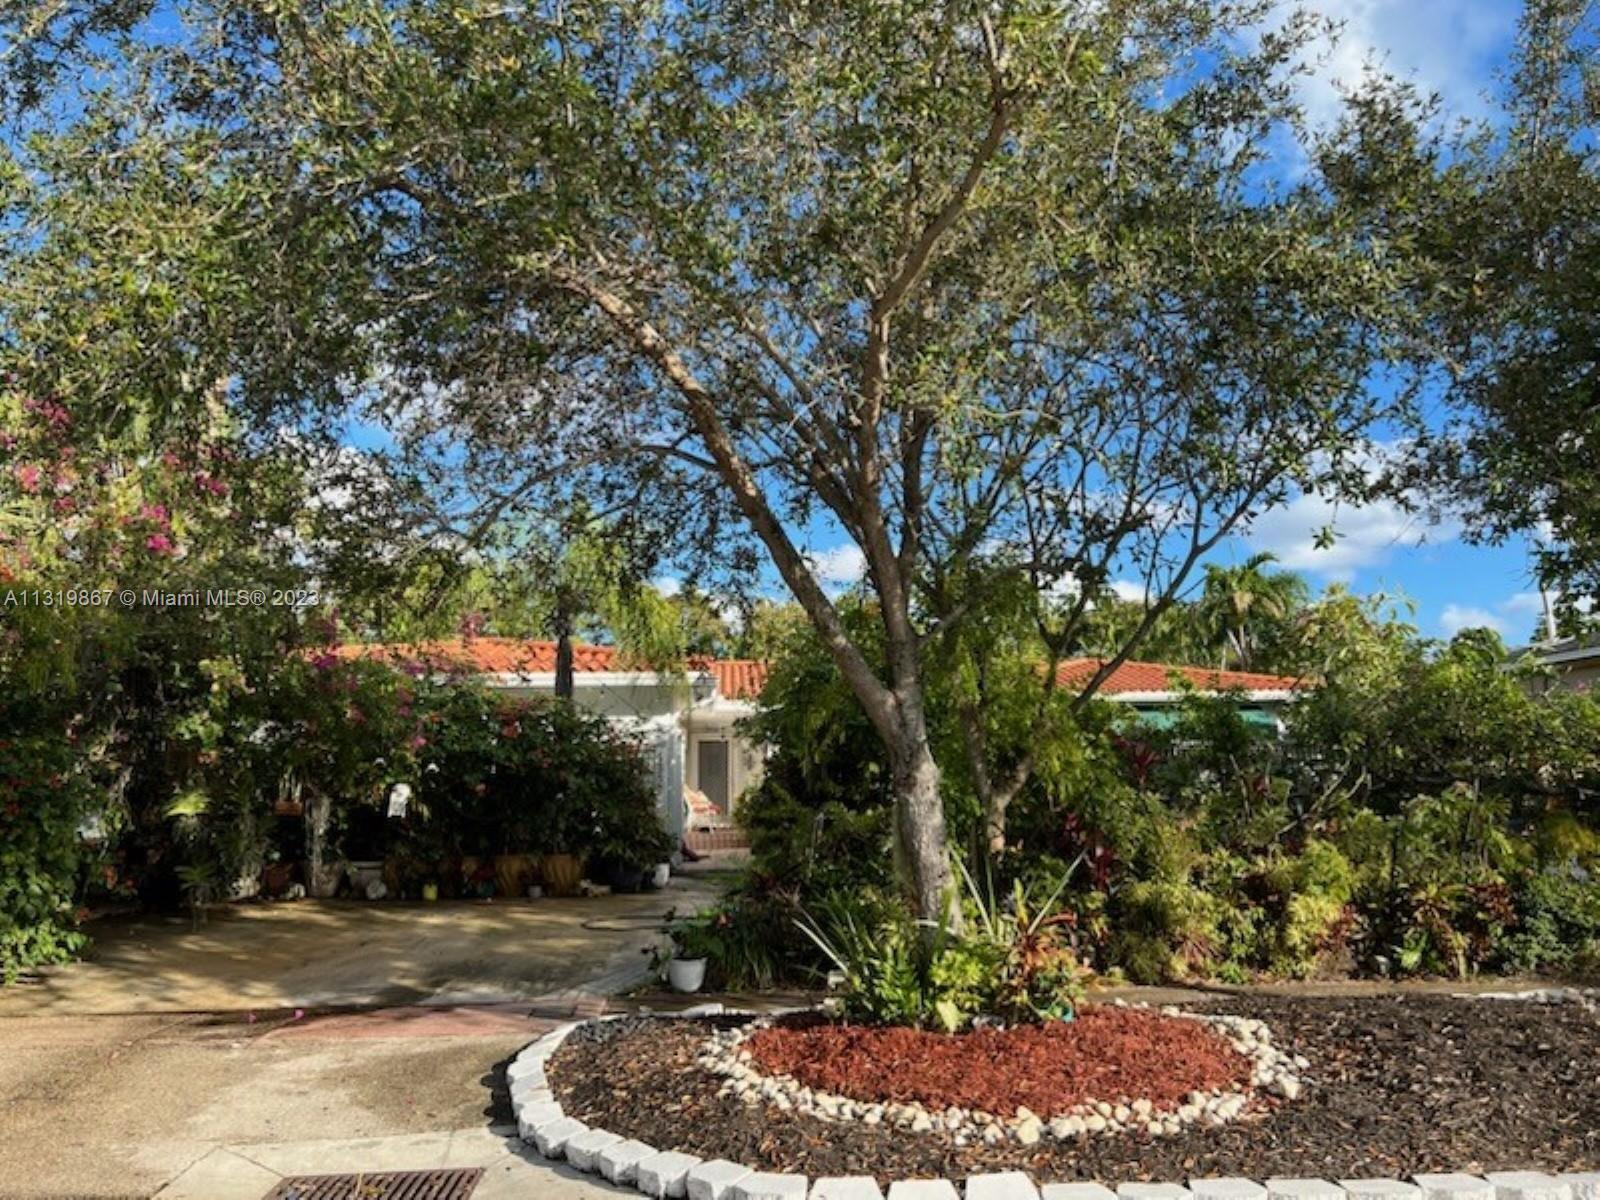 Location, location, location. Large home on an oversized lot located on a quiet street in the heart of mid-beach. Home features an open floor plan, large kosher kitchen, heated pool and separate guest quarters.